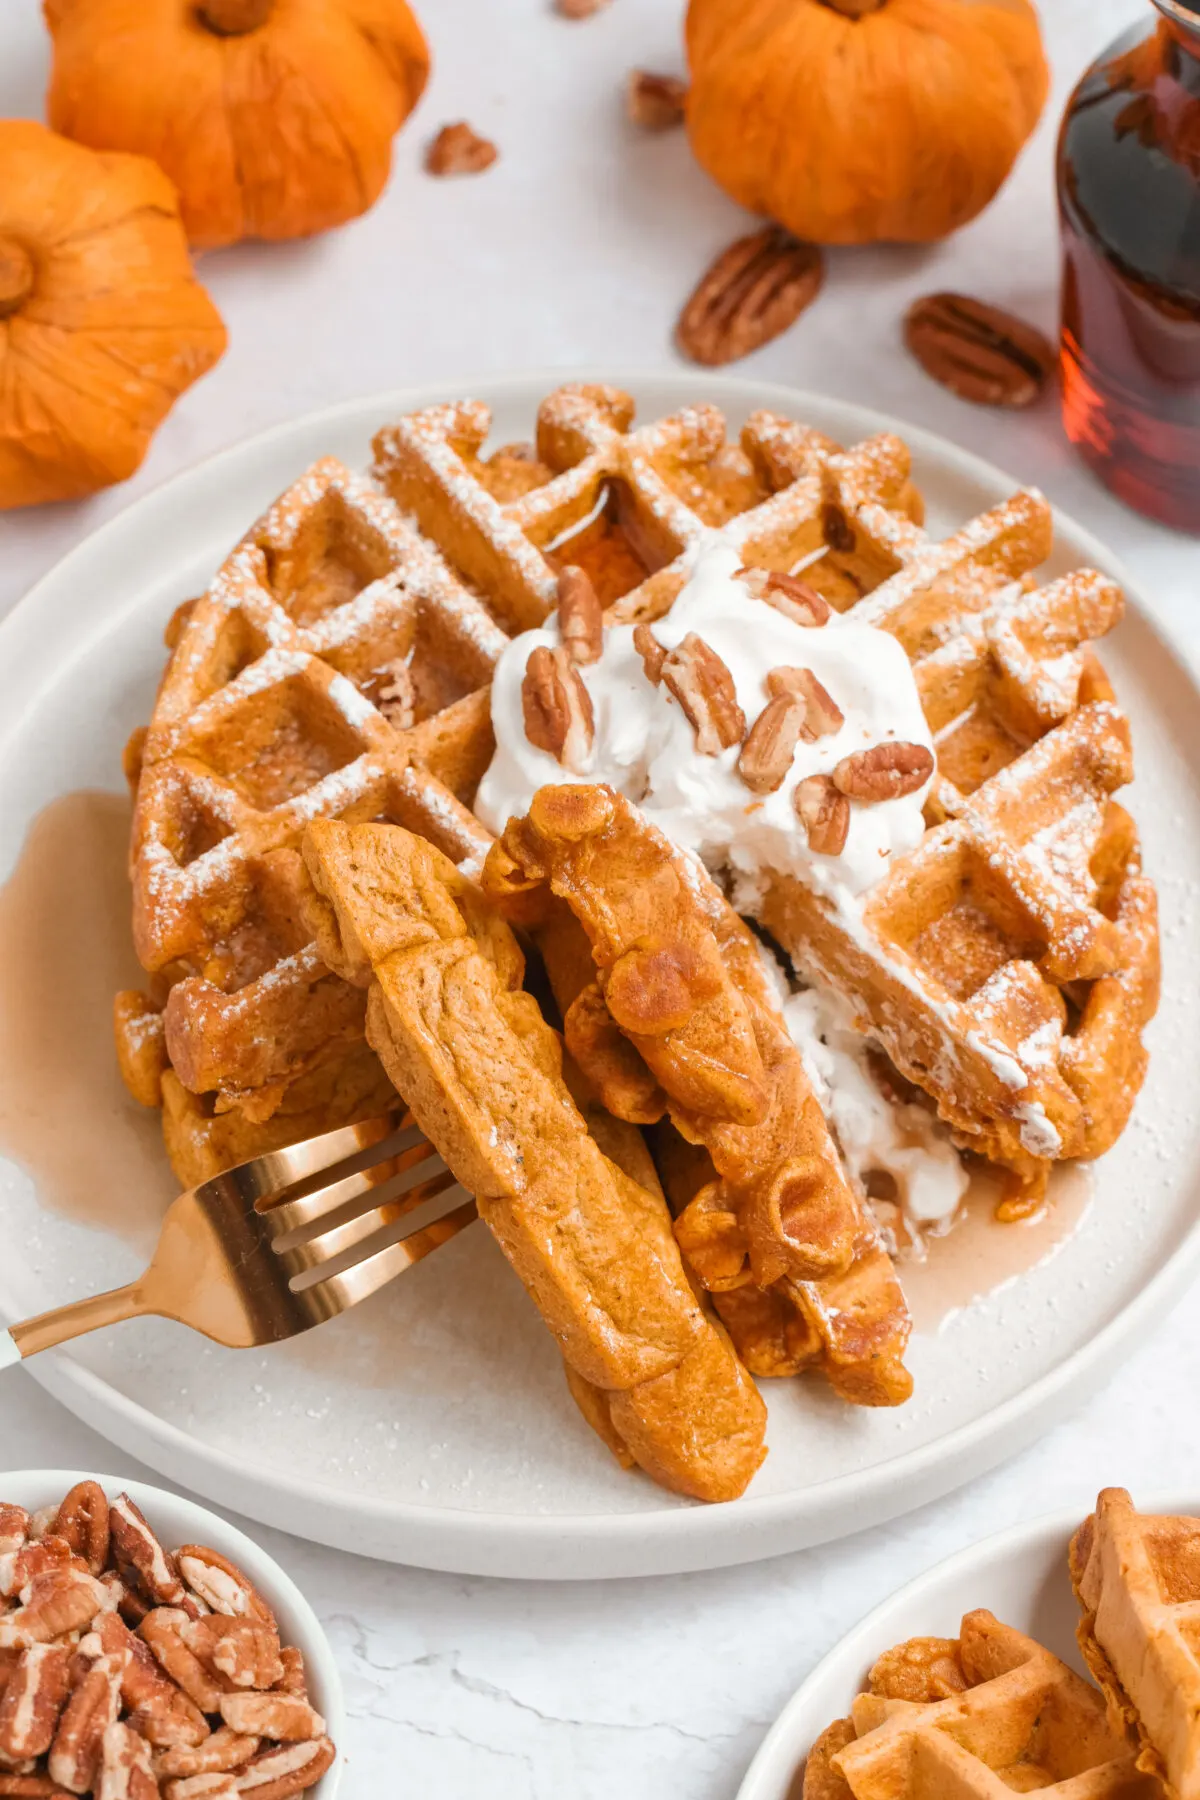 Discover the perfect recipe for pumpkin waffles that's easy to make and tastes delicious. These tasty fall treats are ready in no time!